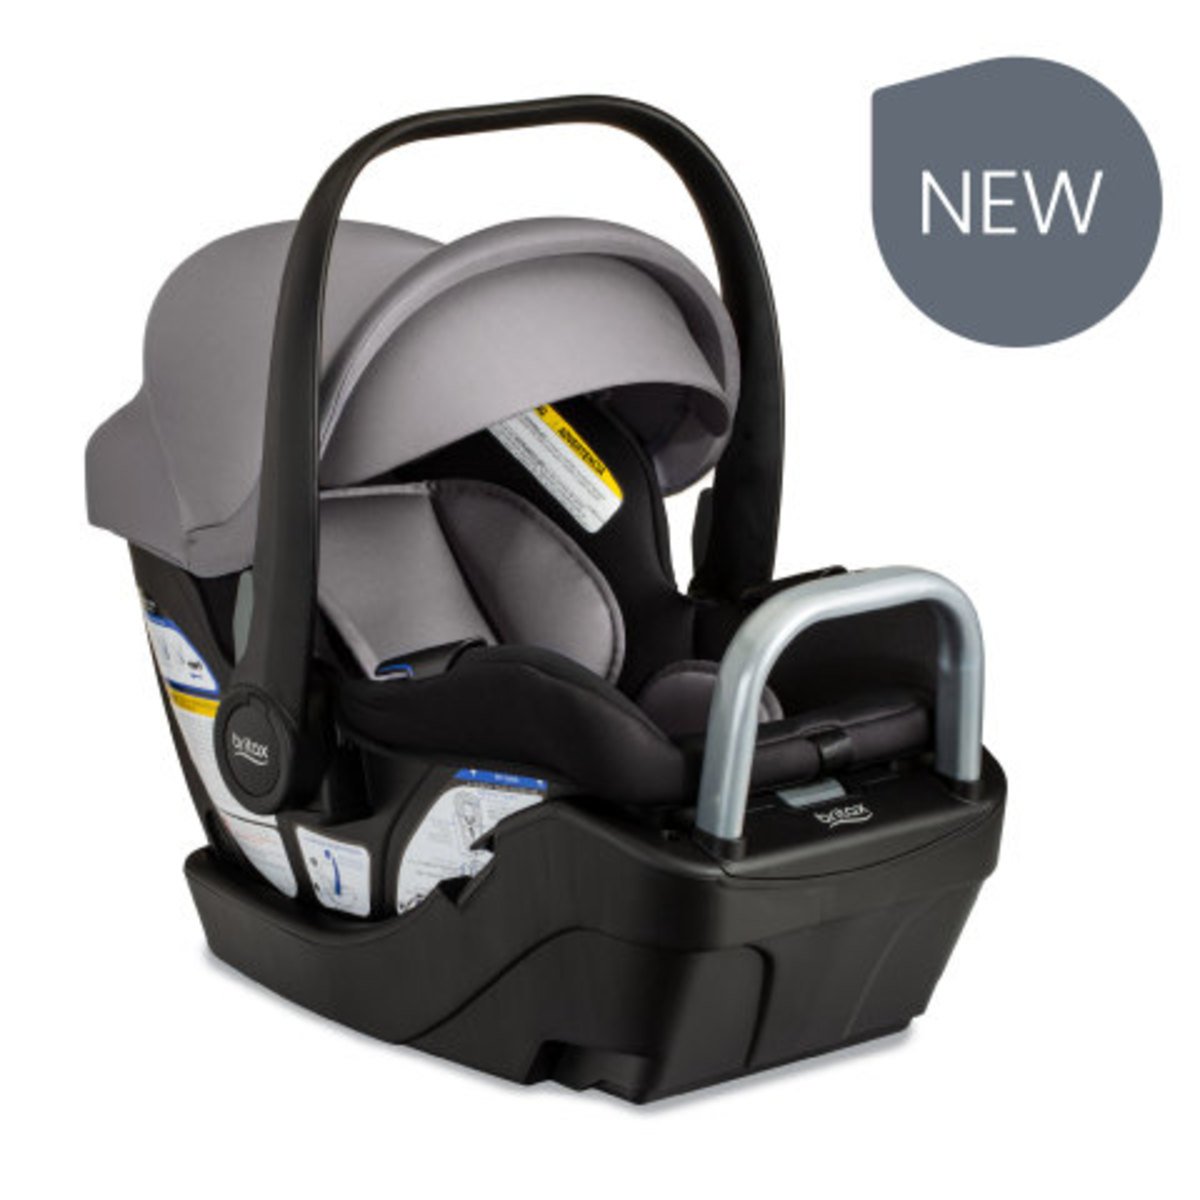 NEW Graphite Onyx Willow S Infant Car Seat (Copy)